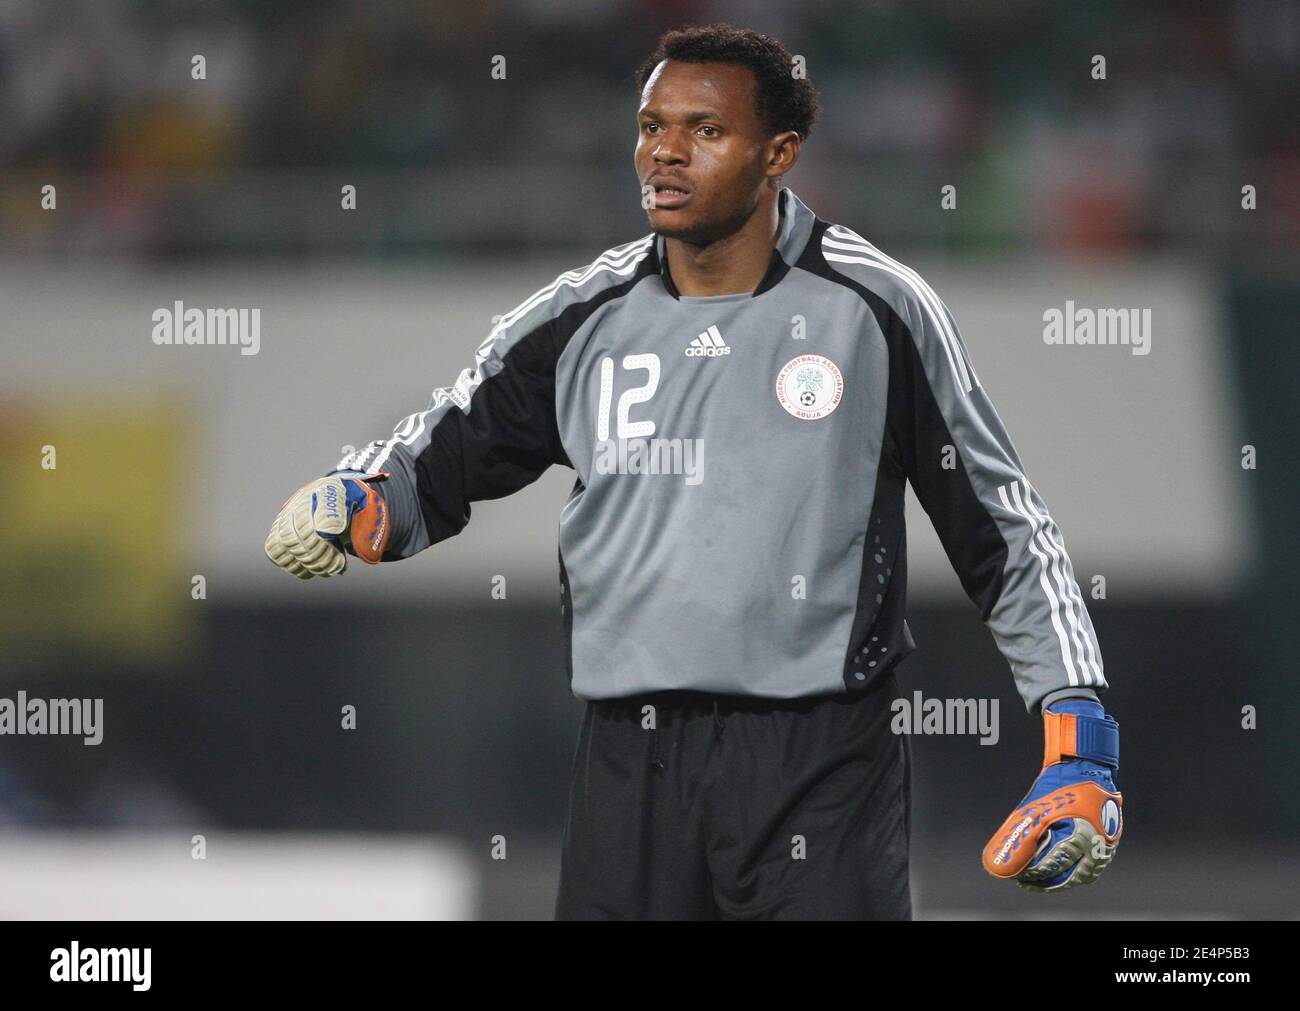 Nigeria's Goalkeeper Ejide Austine during the African Cup of Nations soccer match, Ivory Coast vs Nigeria in Sekondi, Ghana on January 21, 2008. Ivory Coast defeated Nigeria 1-0. Photo by Steeve McMay/Cameleon/ABACAPRESS.COM Stock Photo